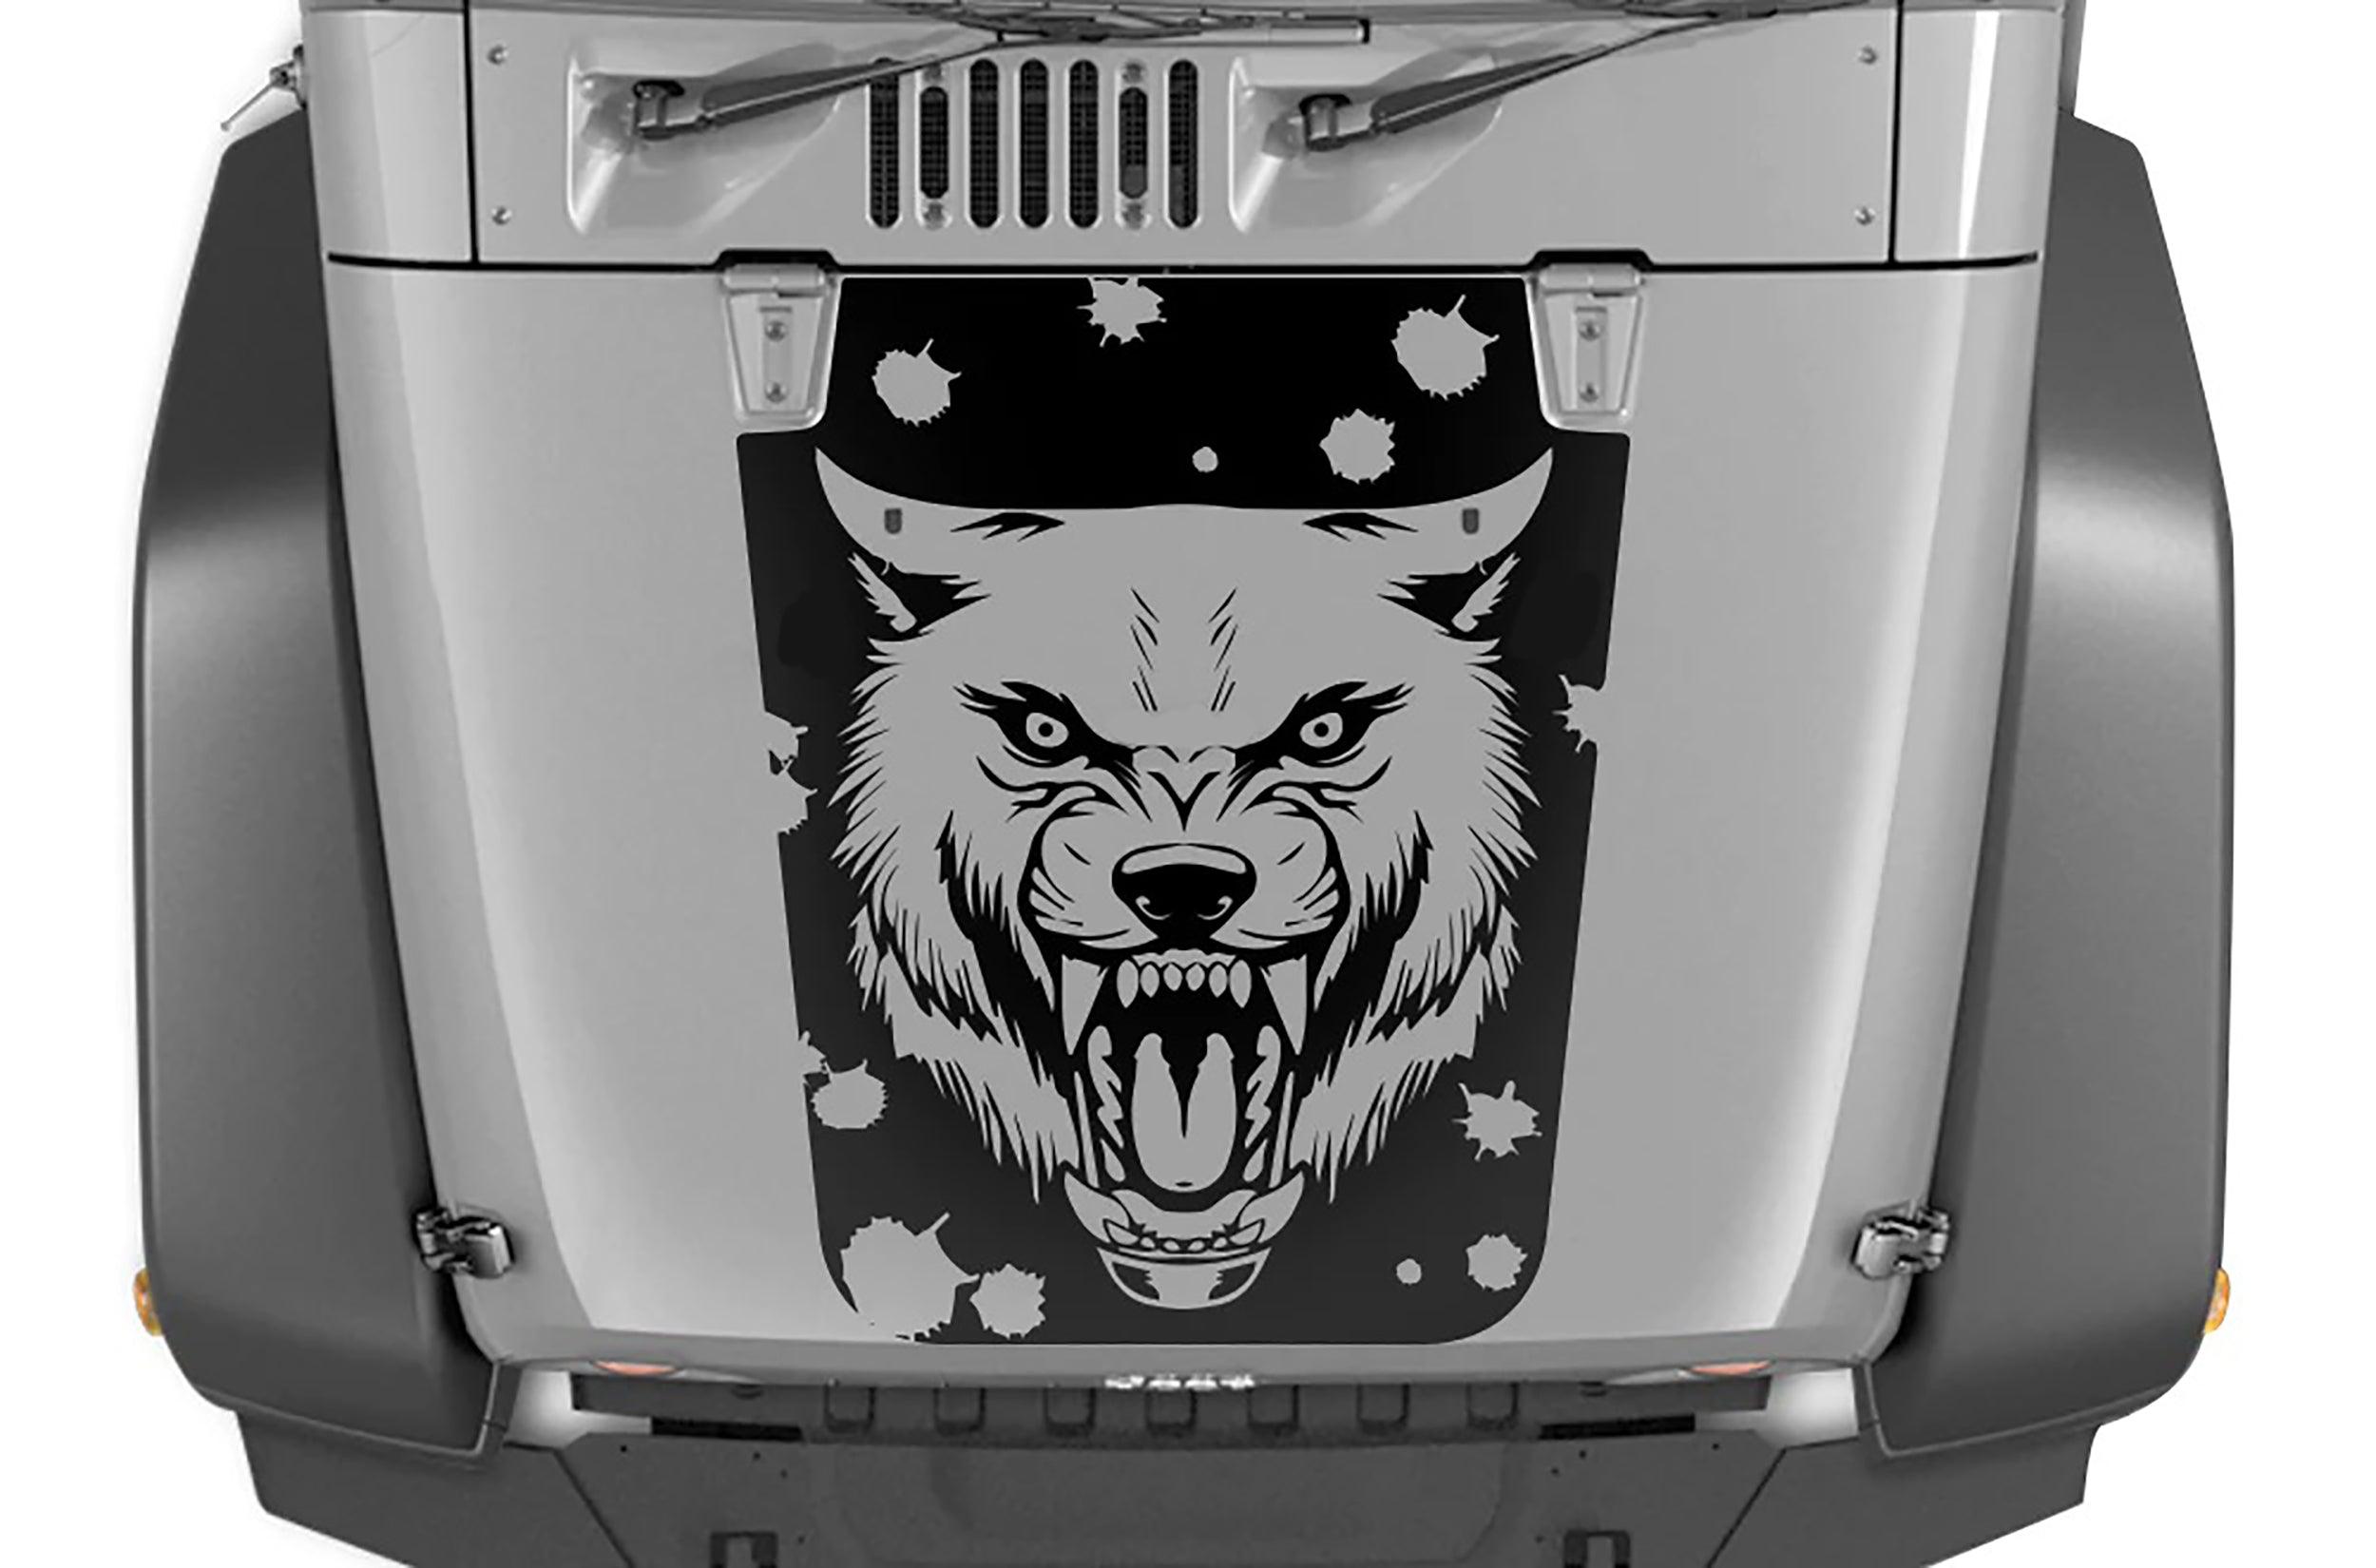 Jeep Wrangler JK (2007-2018) Custom Decals, Graphics and Stickers - Wolf Hood Decal - Jkprostickers